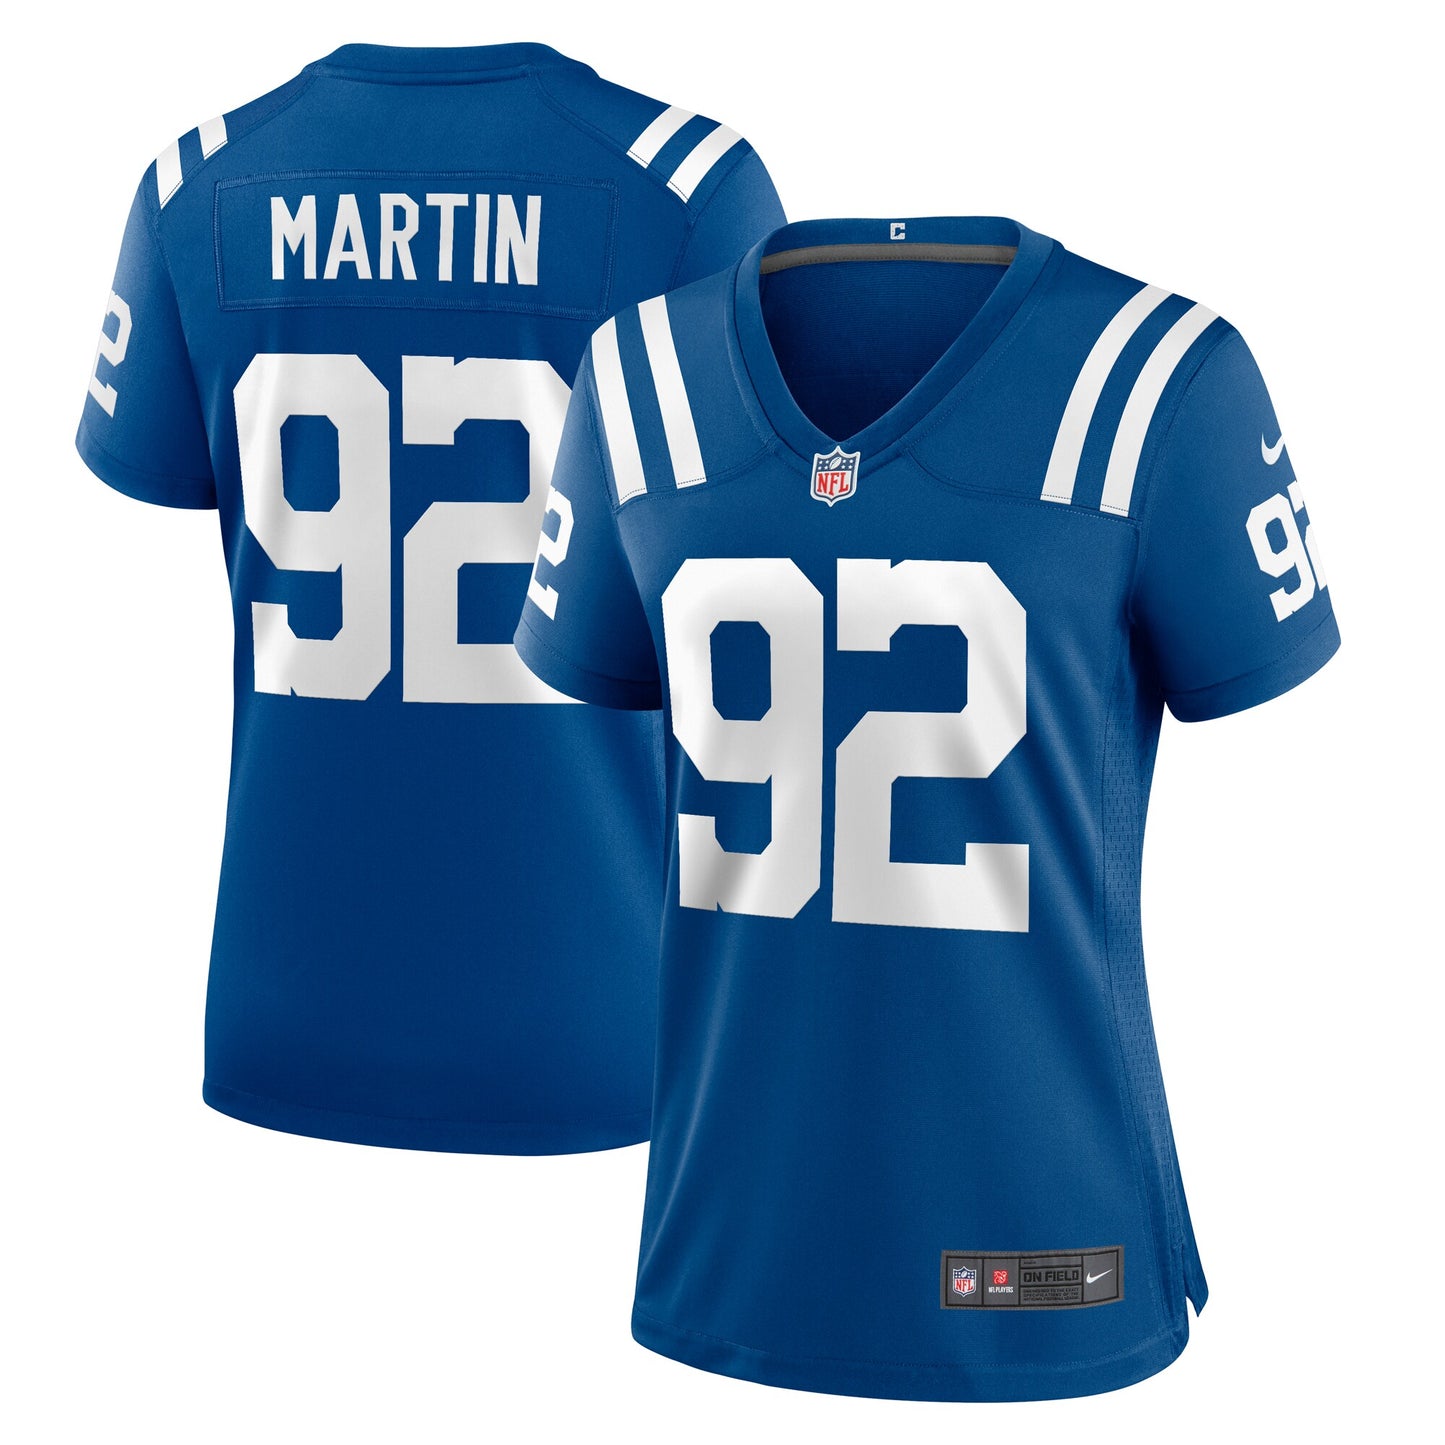 Jacob Martin Indianapolis Colts Nike Women's Team Game Jersey - Royal